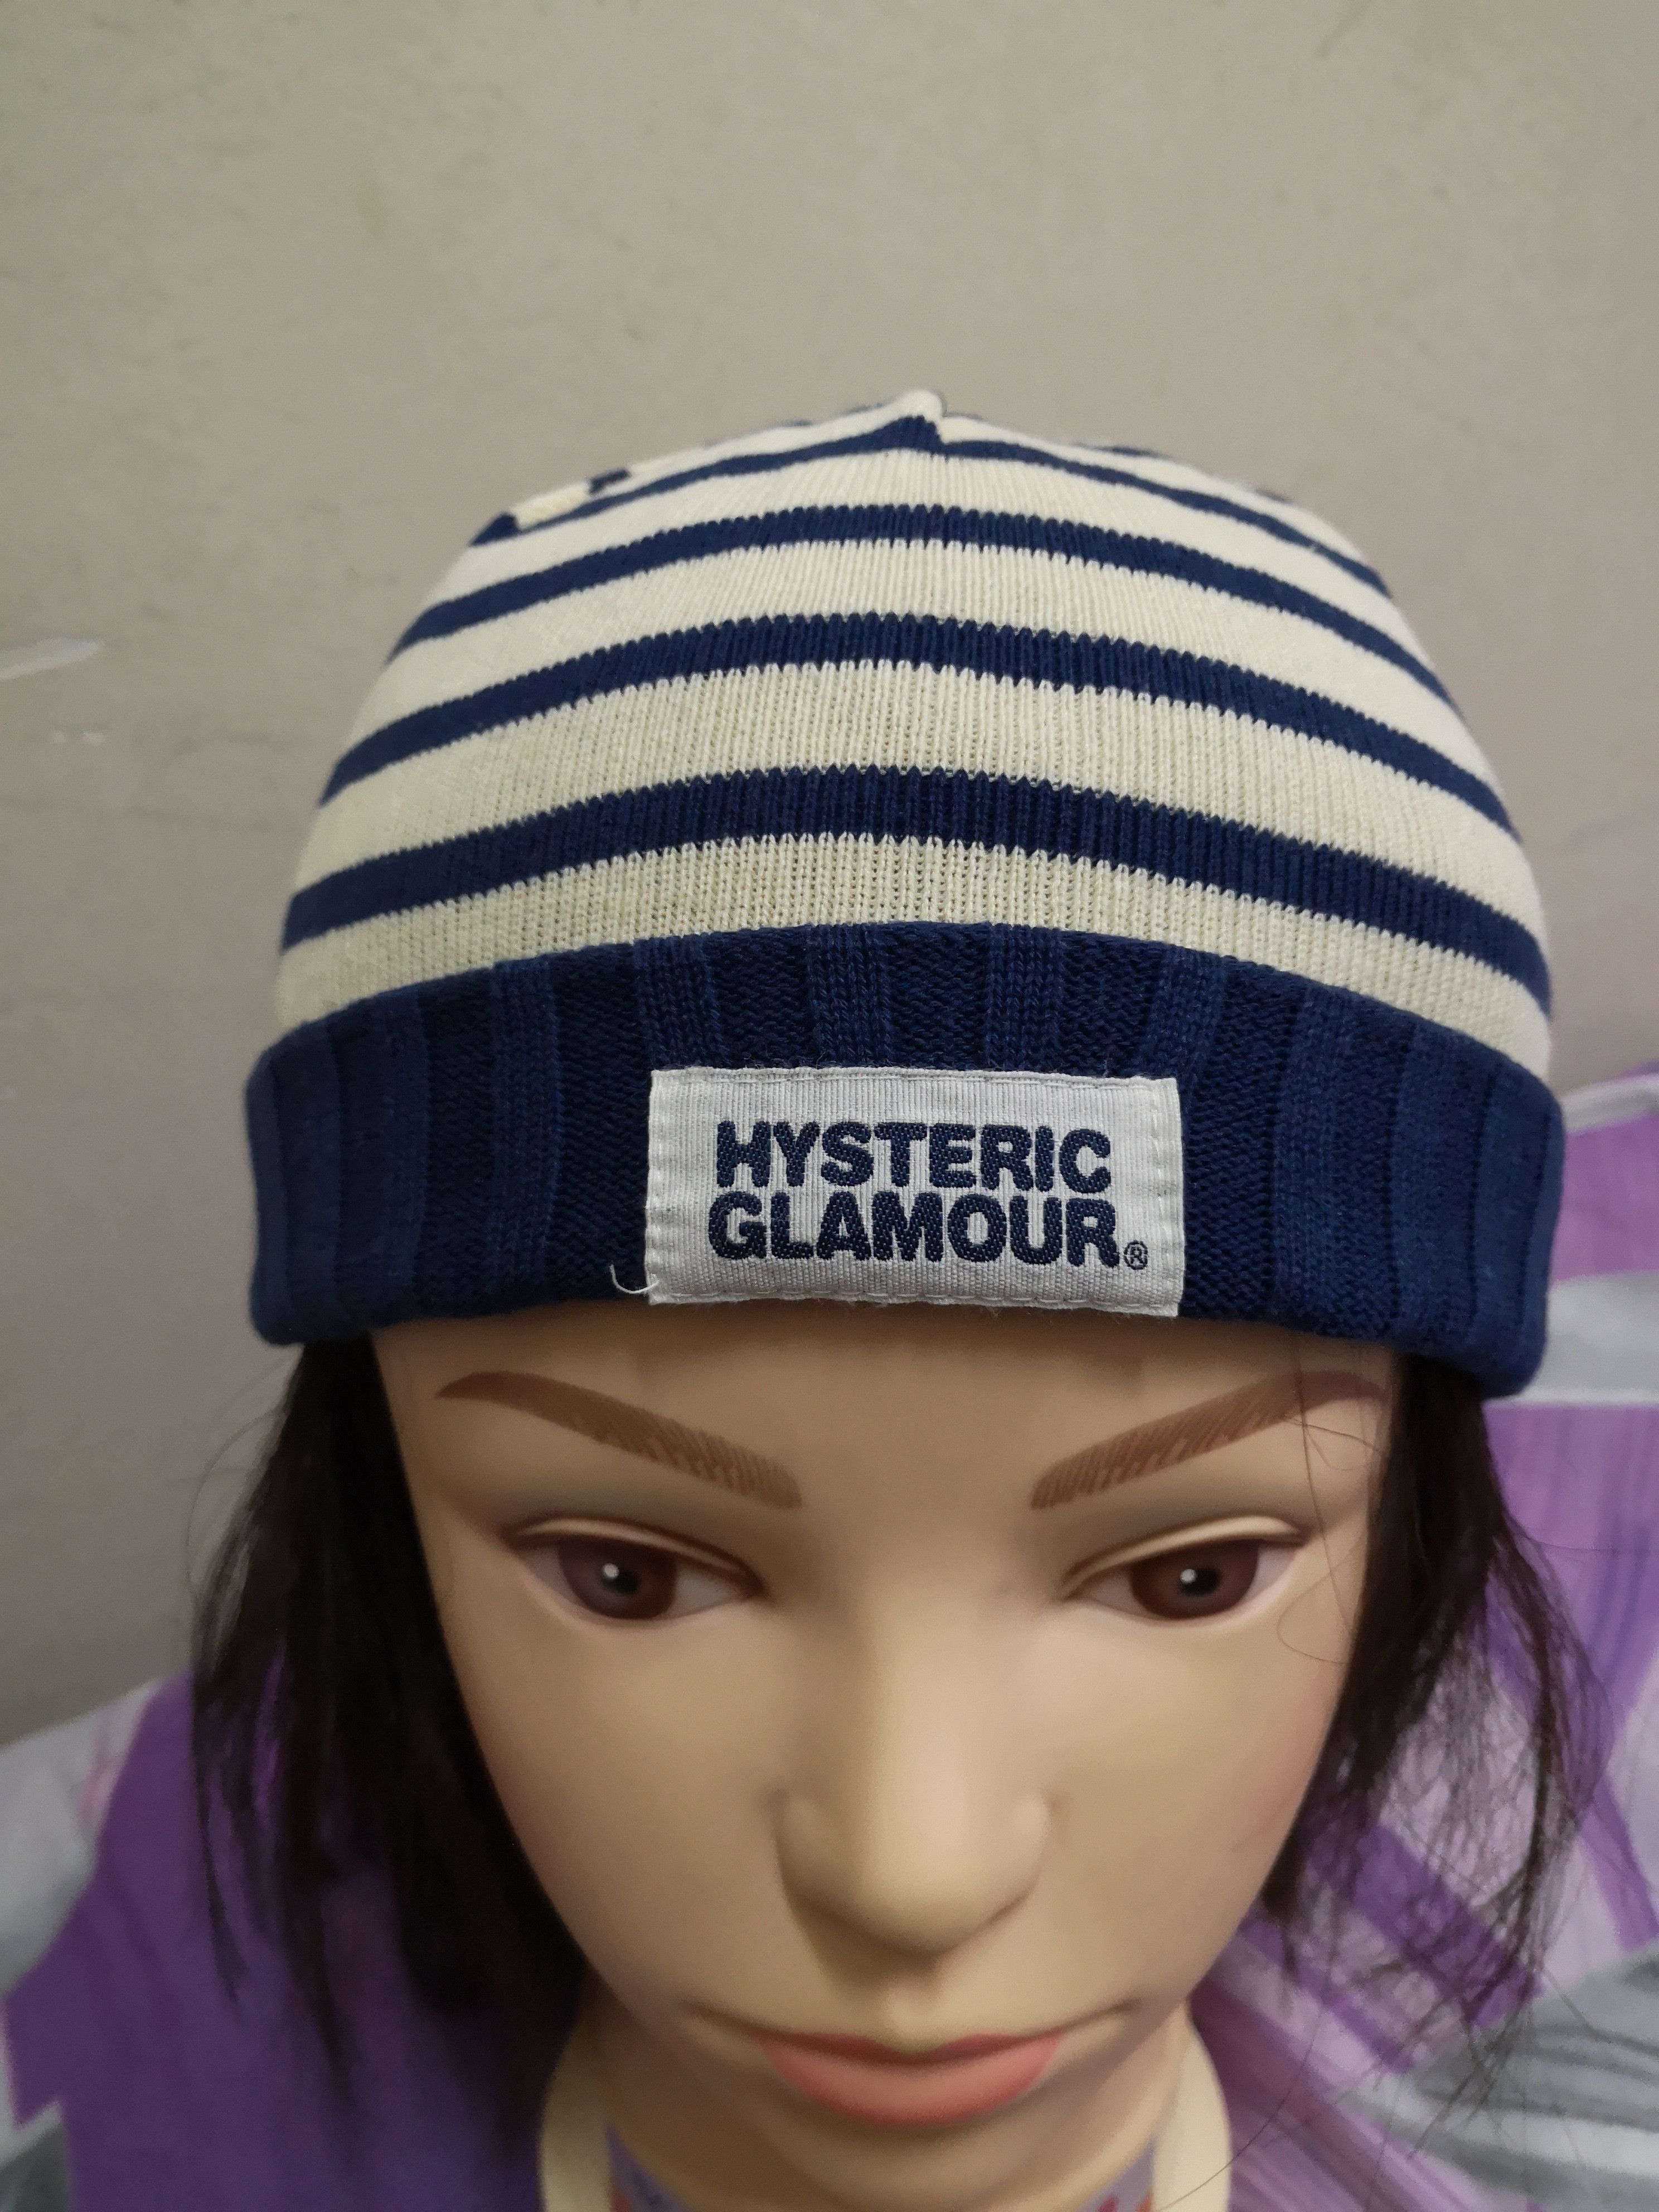 Hysteric Glamour Hysteric Glamour Reversible Beanie Hats | Grailed